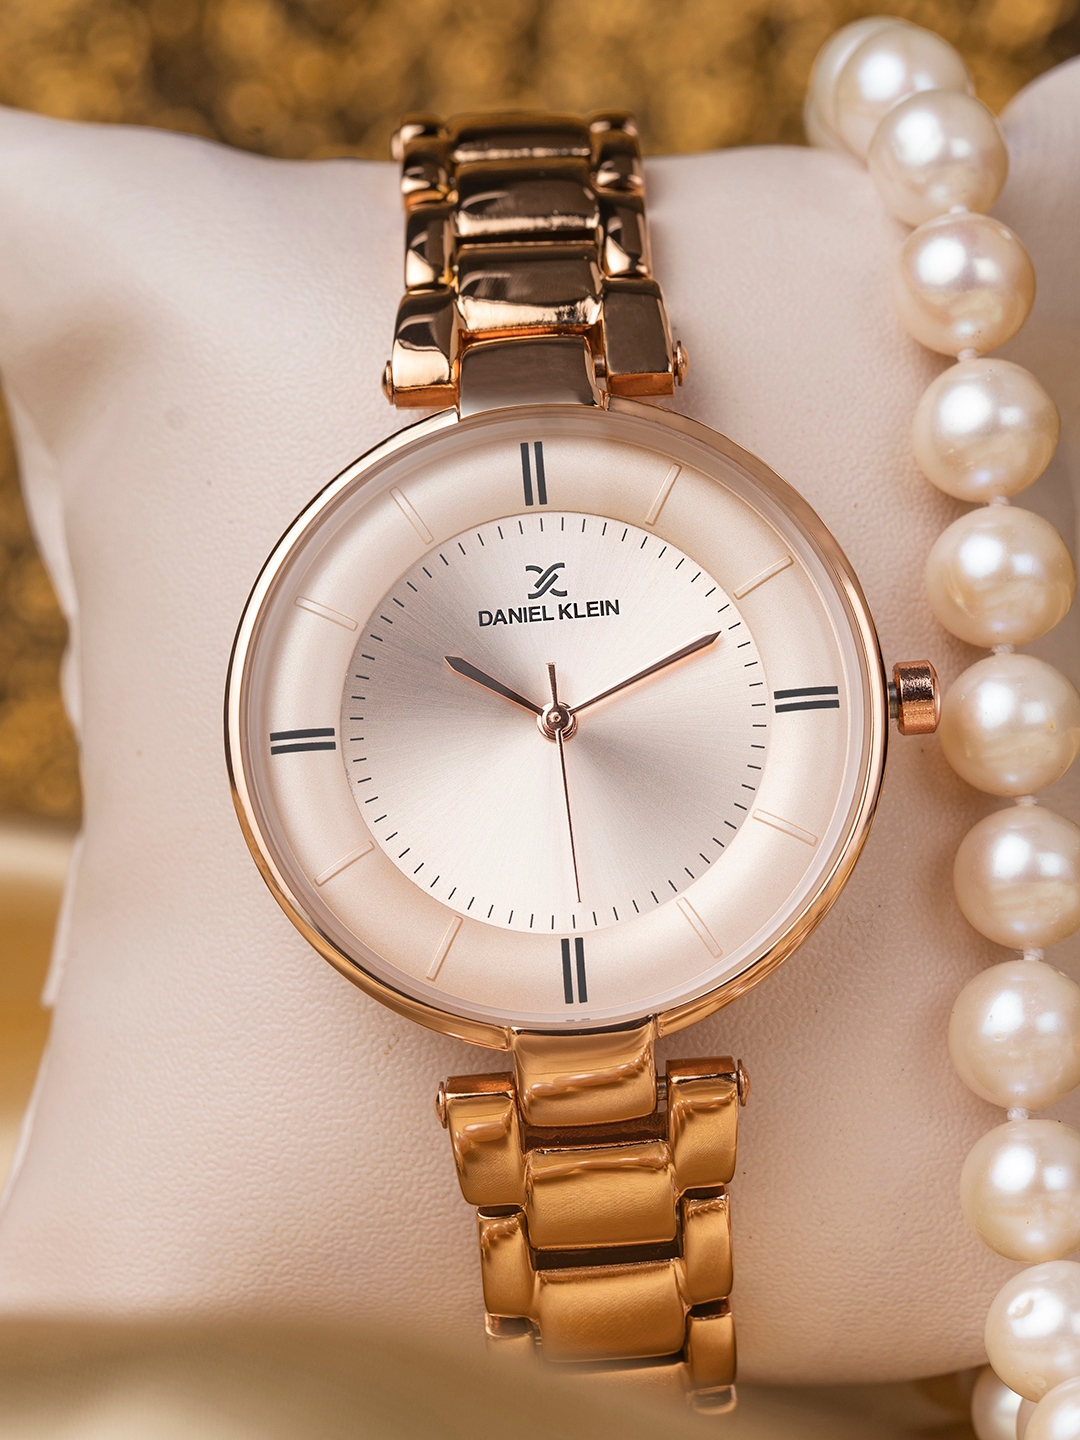 LOUIS VUITTON WOMEN ROSE GOLD-TONED DIAL WATCH at Best Price in Delhi